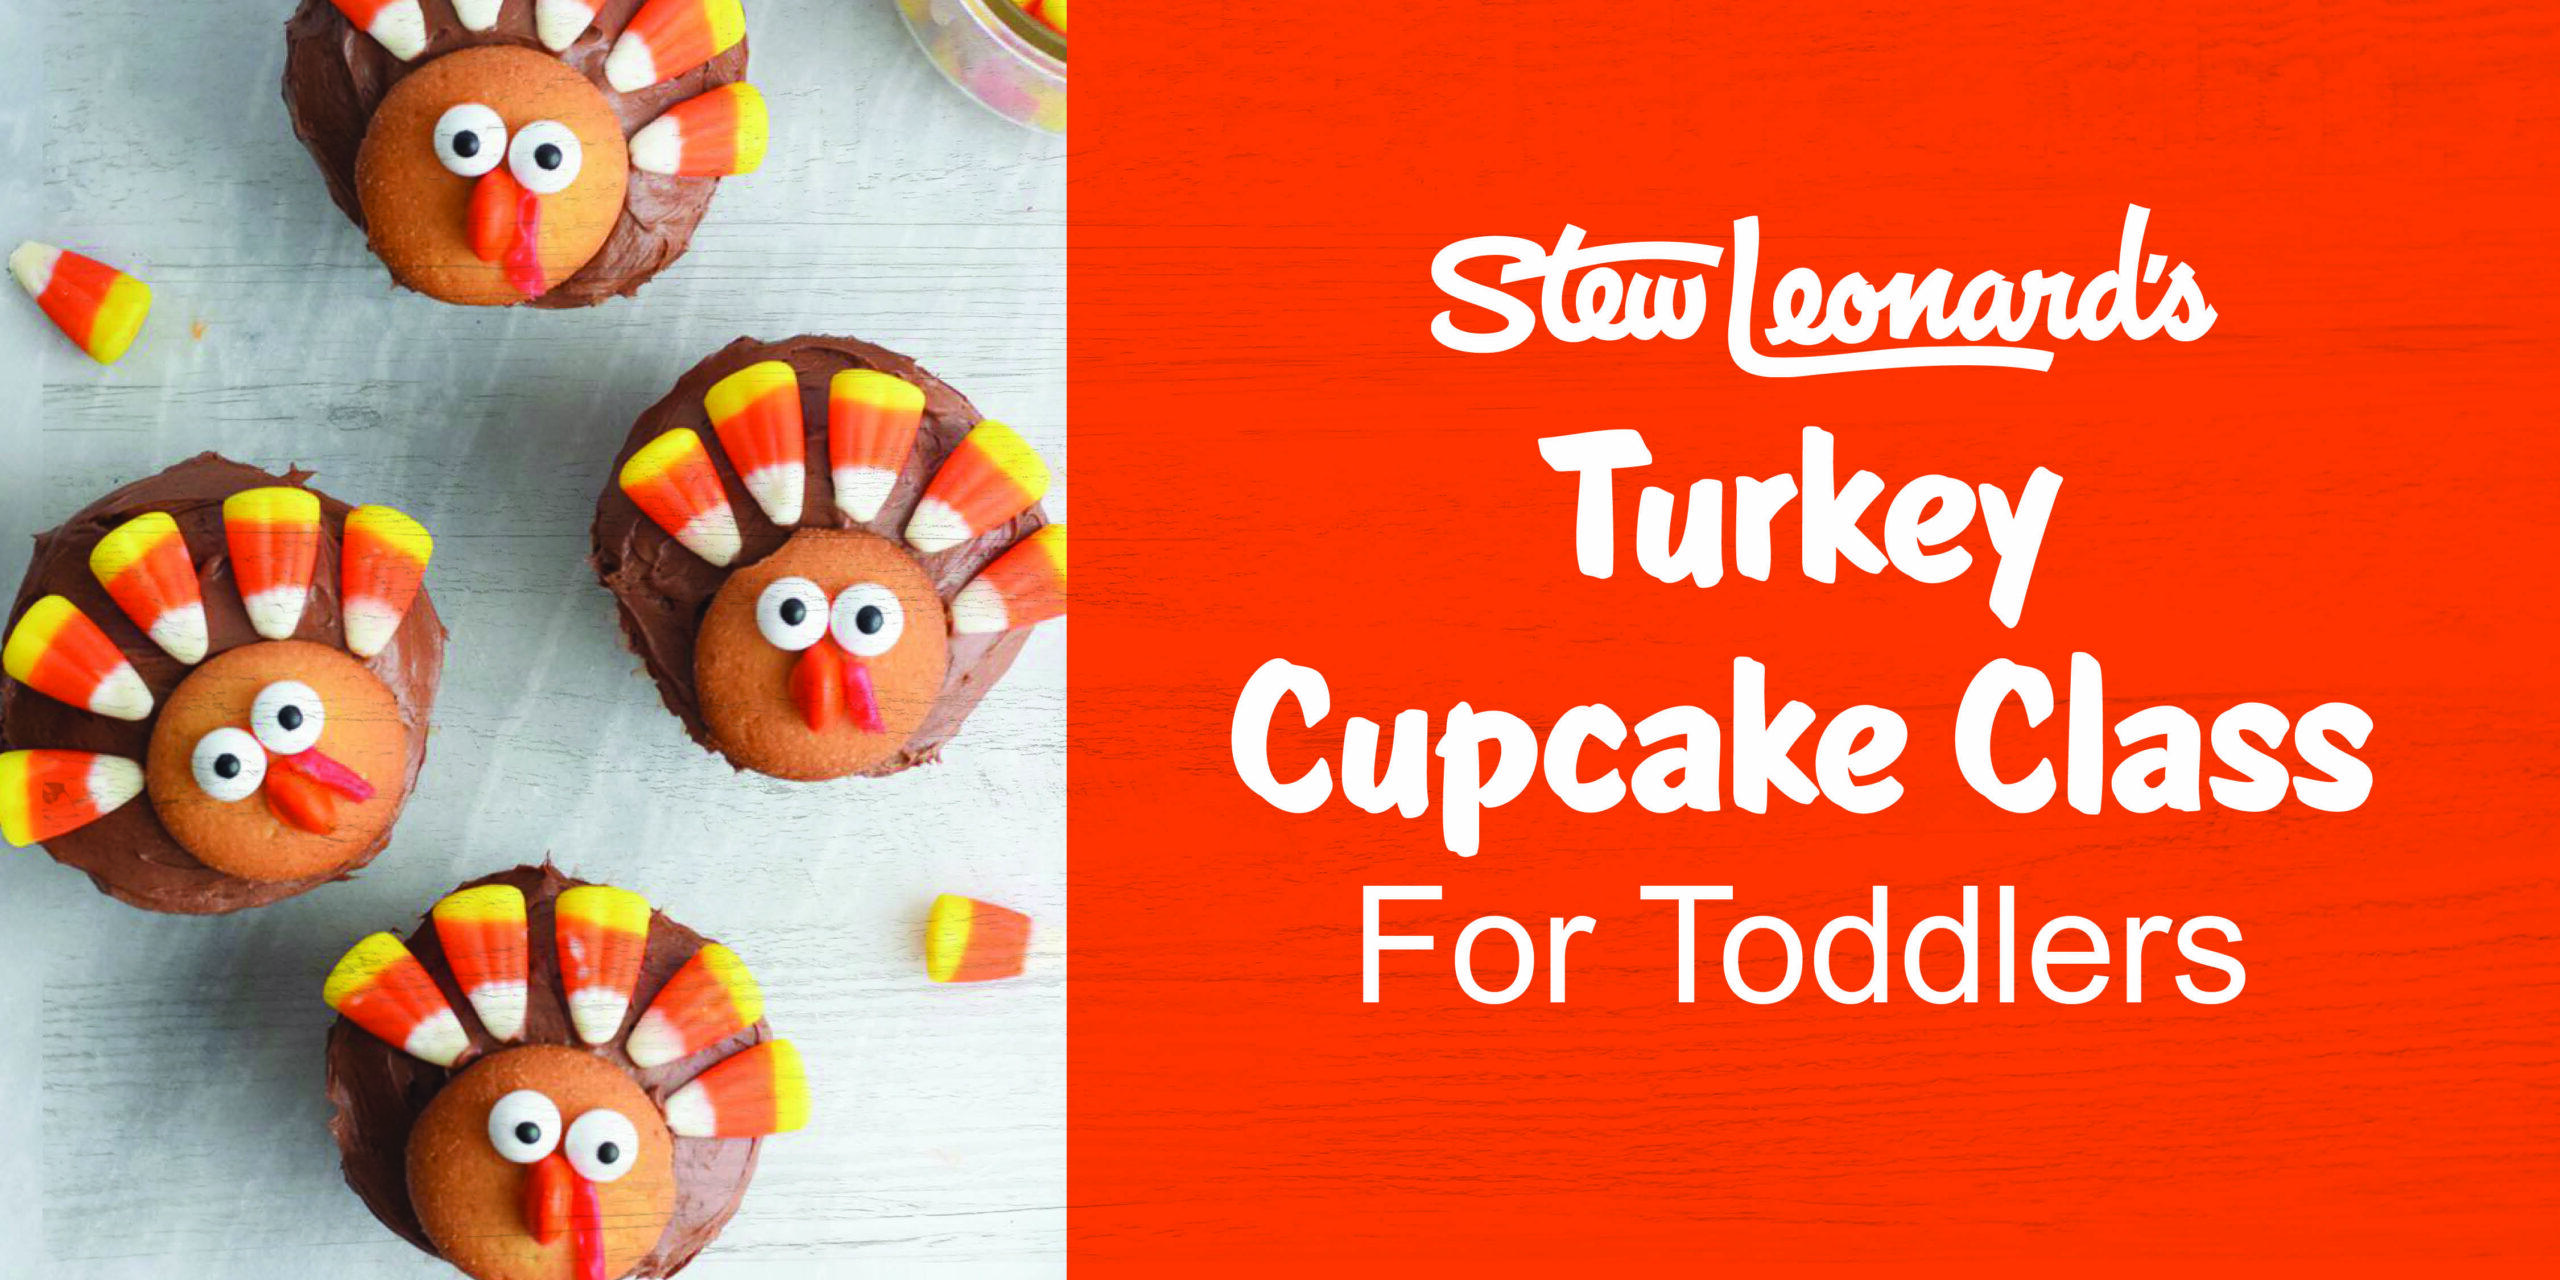 Turkey-Themed Cupcake Class for Toddlers